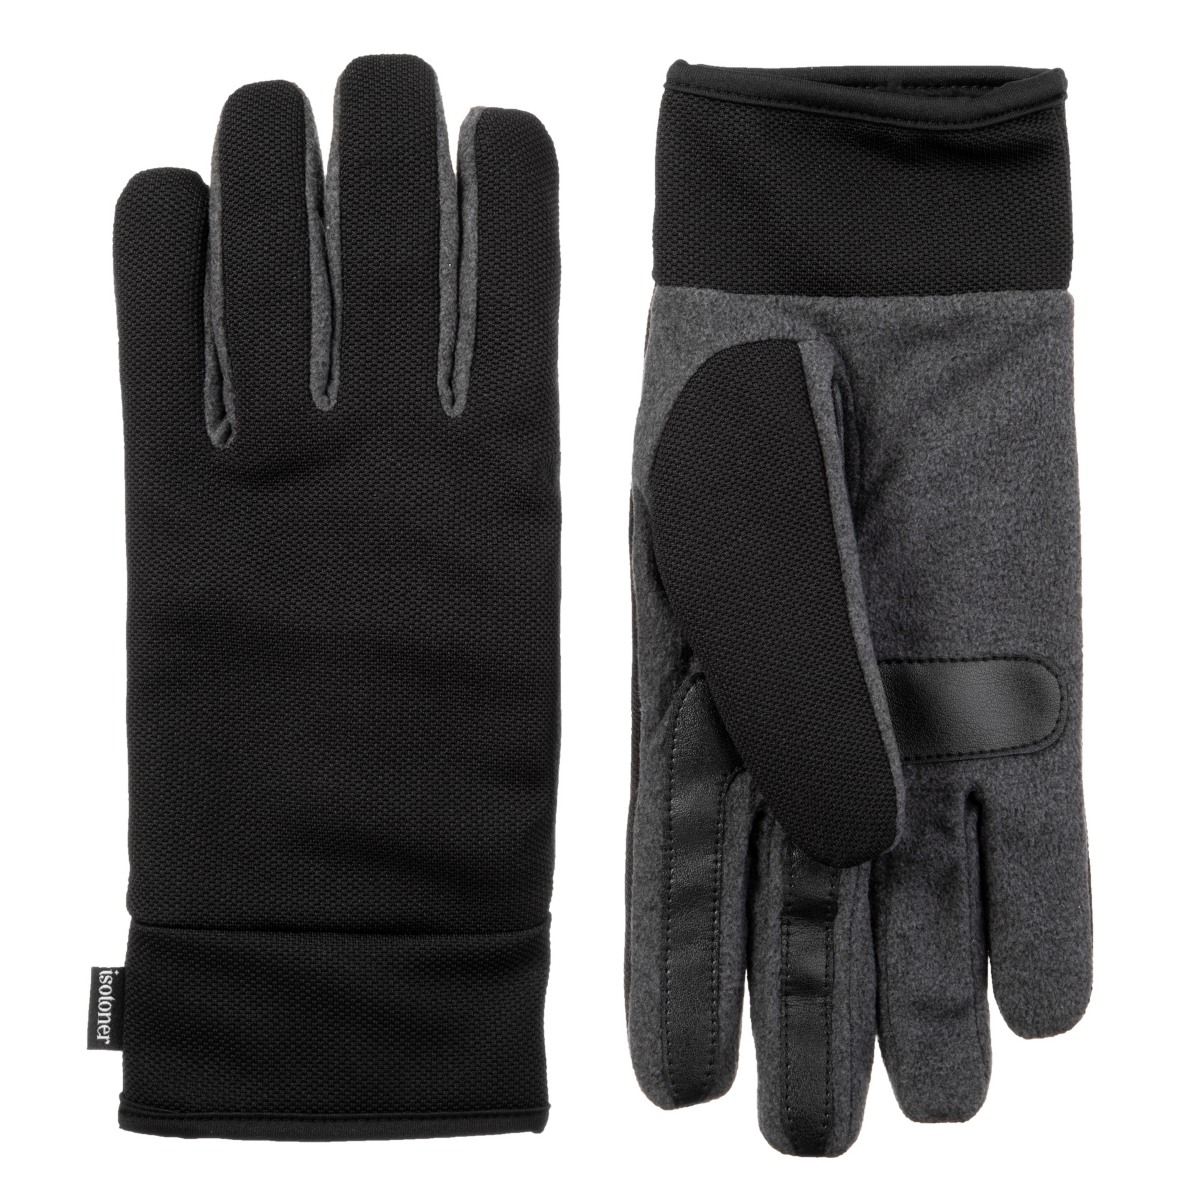 Men's Lined Water Repellent Tech Stretch Gloves - Dark Charcoal Heathered